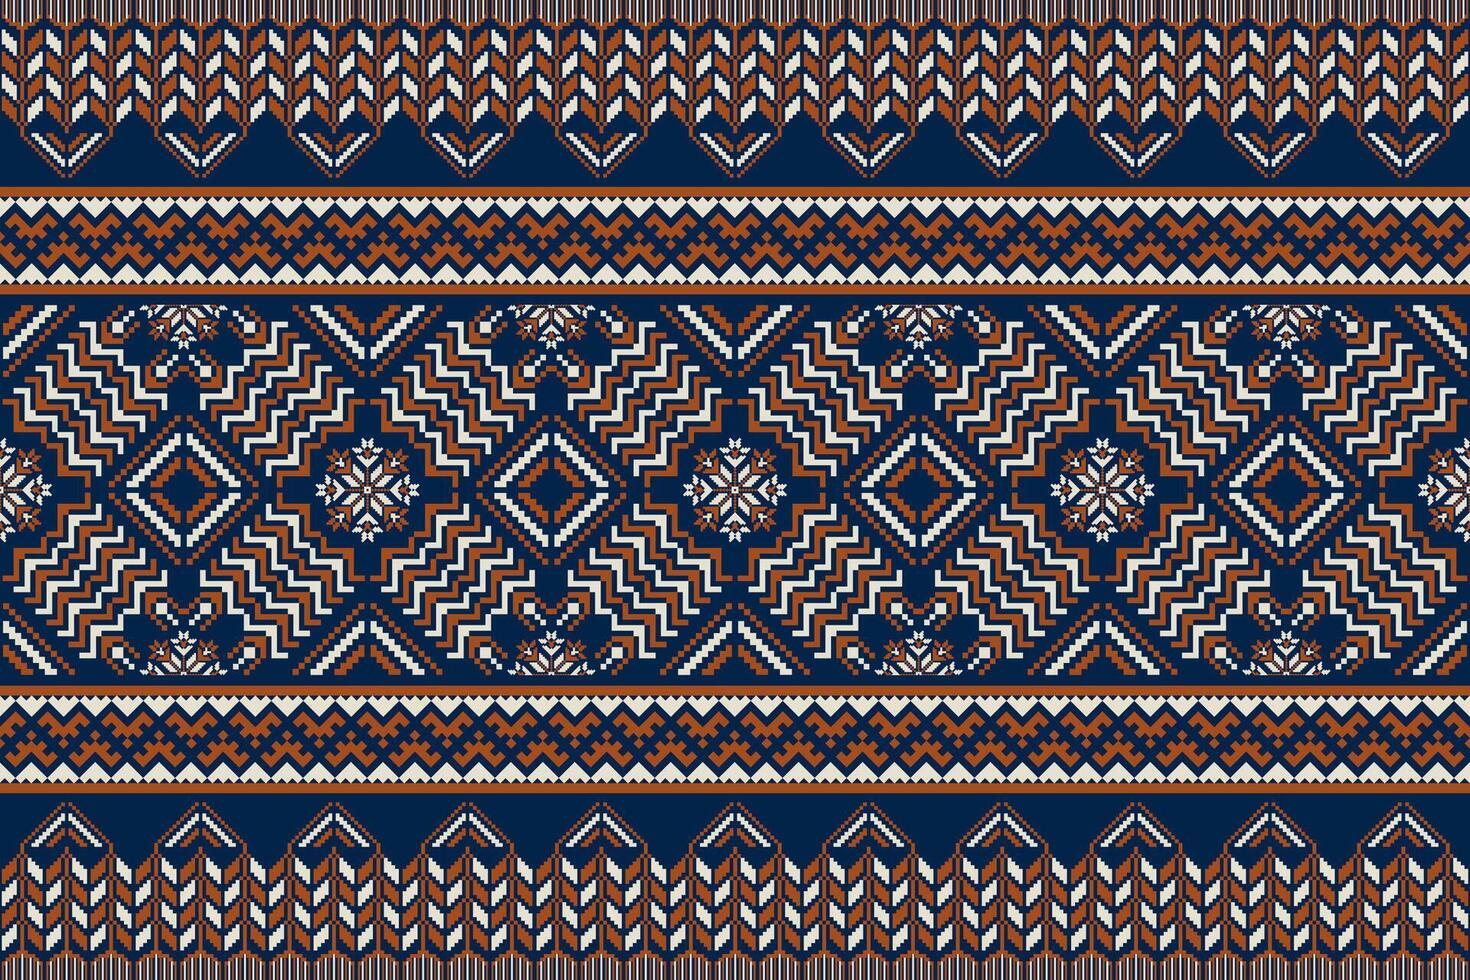 Colorful ethnic geometric embroidery pattern. Embroidery folk geometric shape seamless pattern. Ethnic embroidery pattern use for fabric, textile, home decoration elements, upholstery, etc. vector